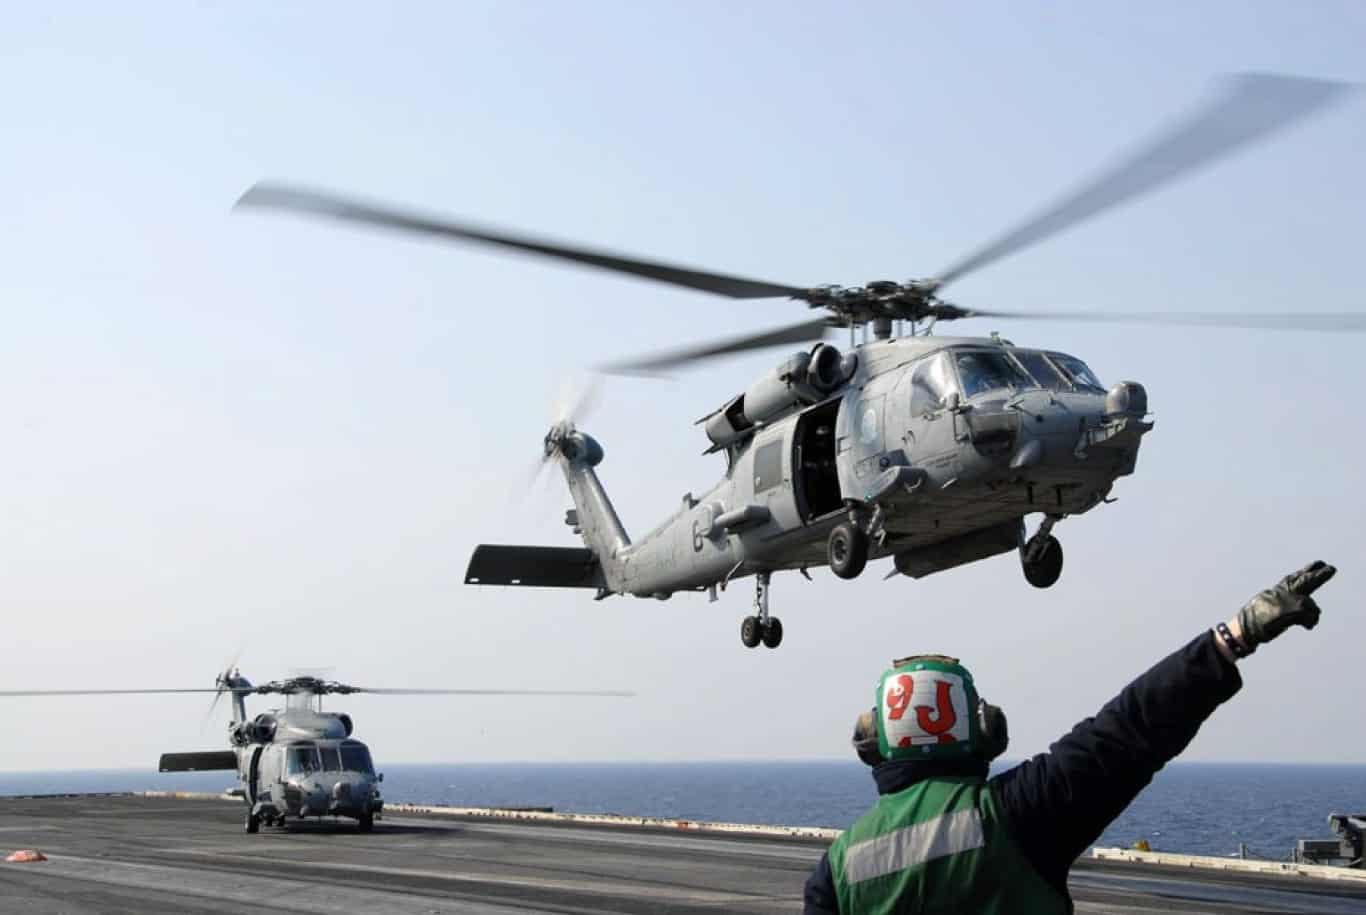 Japan+Black+Hawk+helicopter | Sea Hawk launches from USS Ronald Reagan during relief efforts in Japan following earthquake.